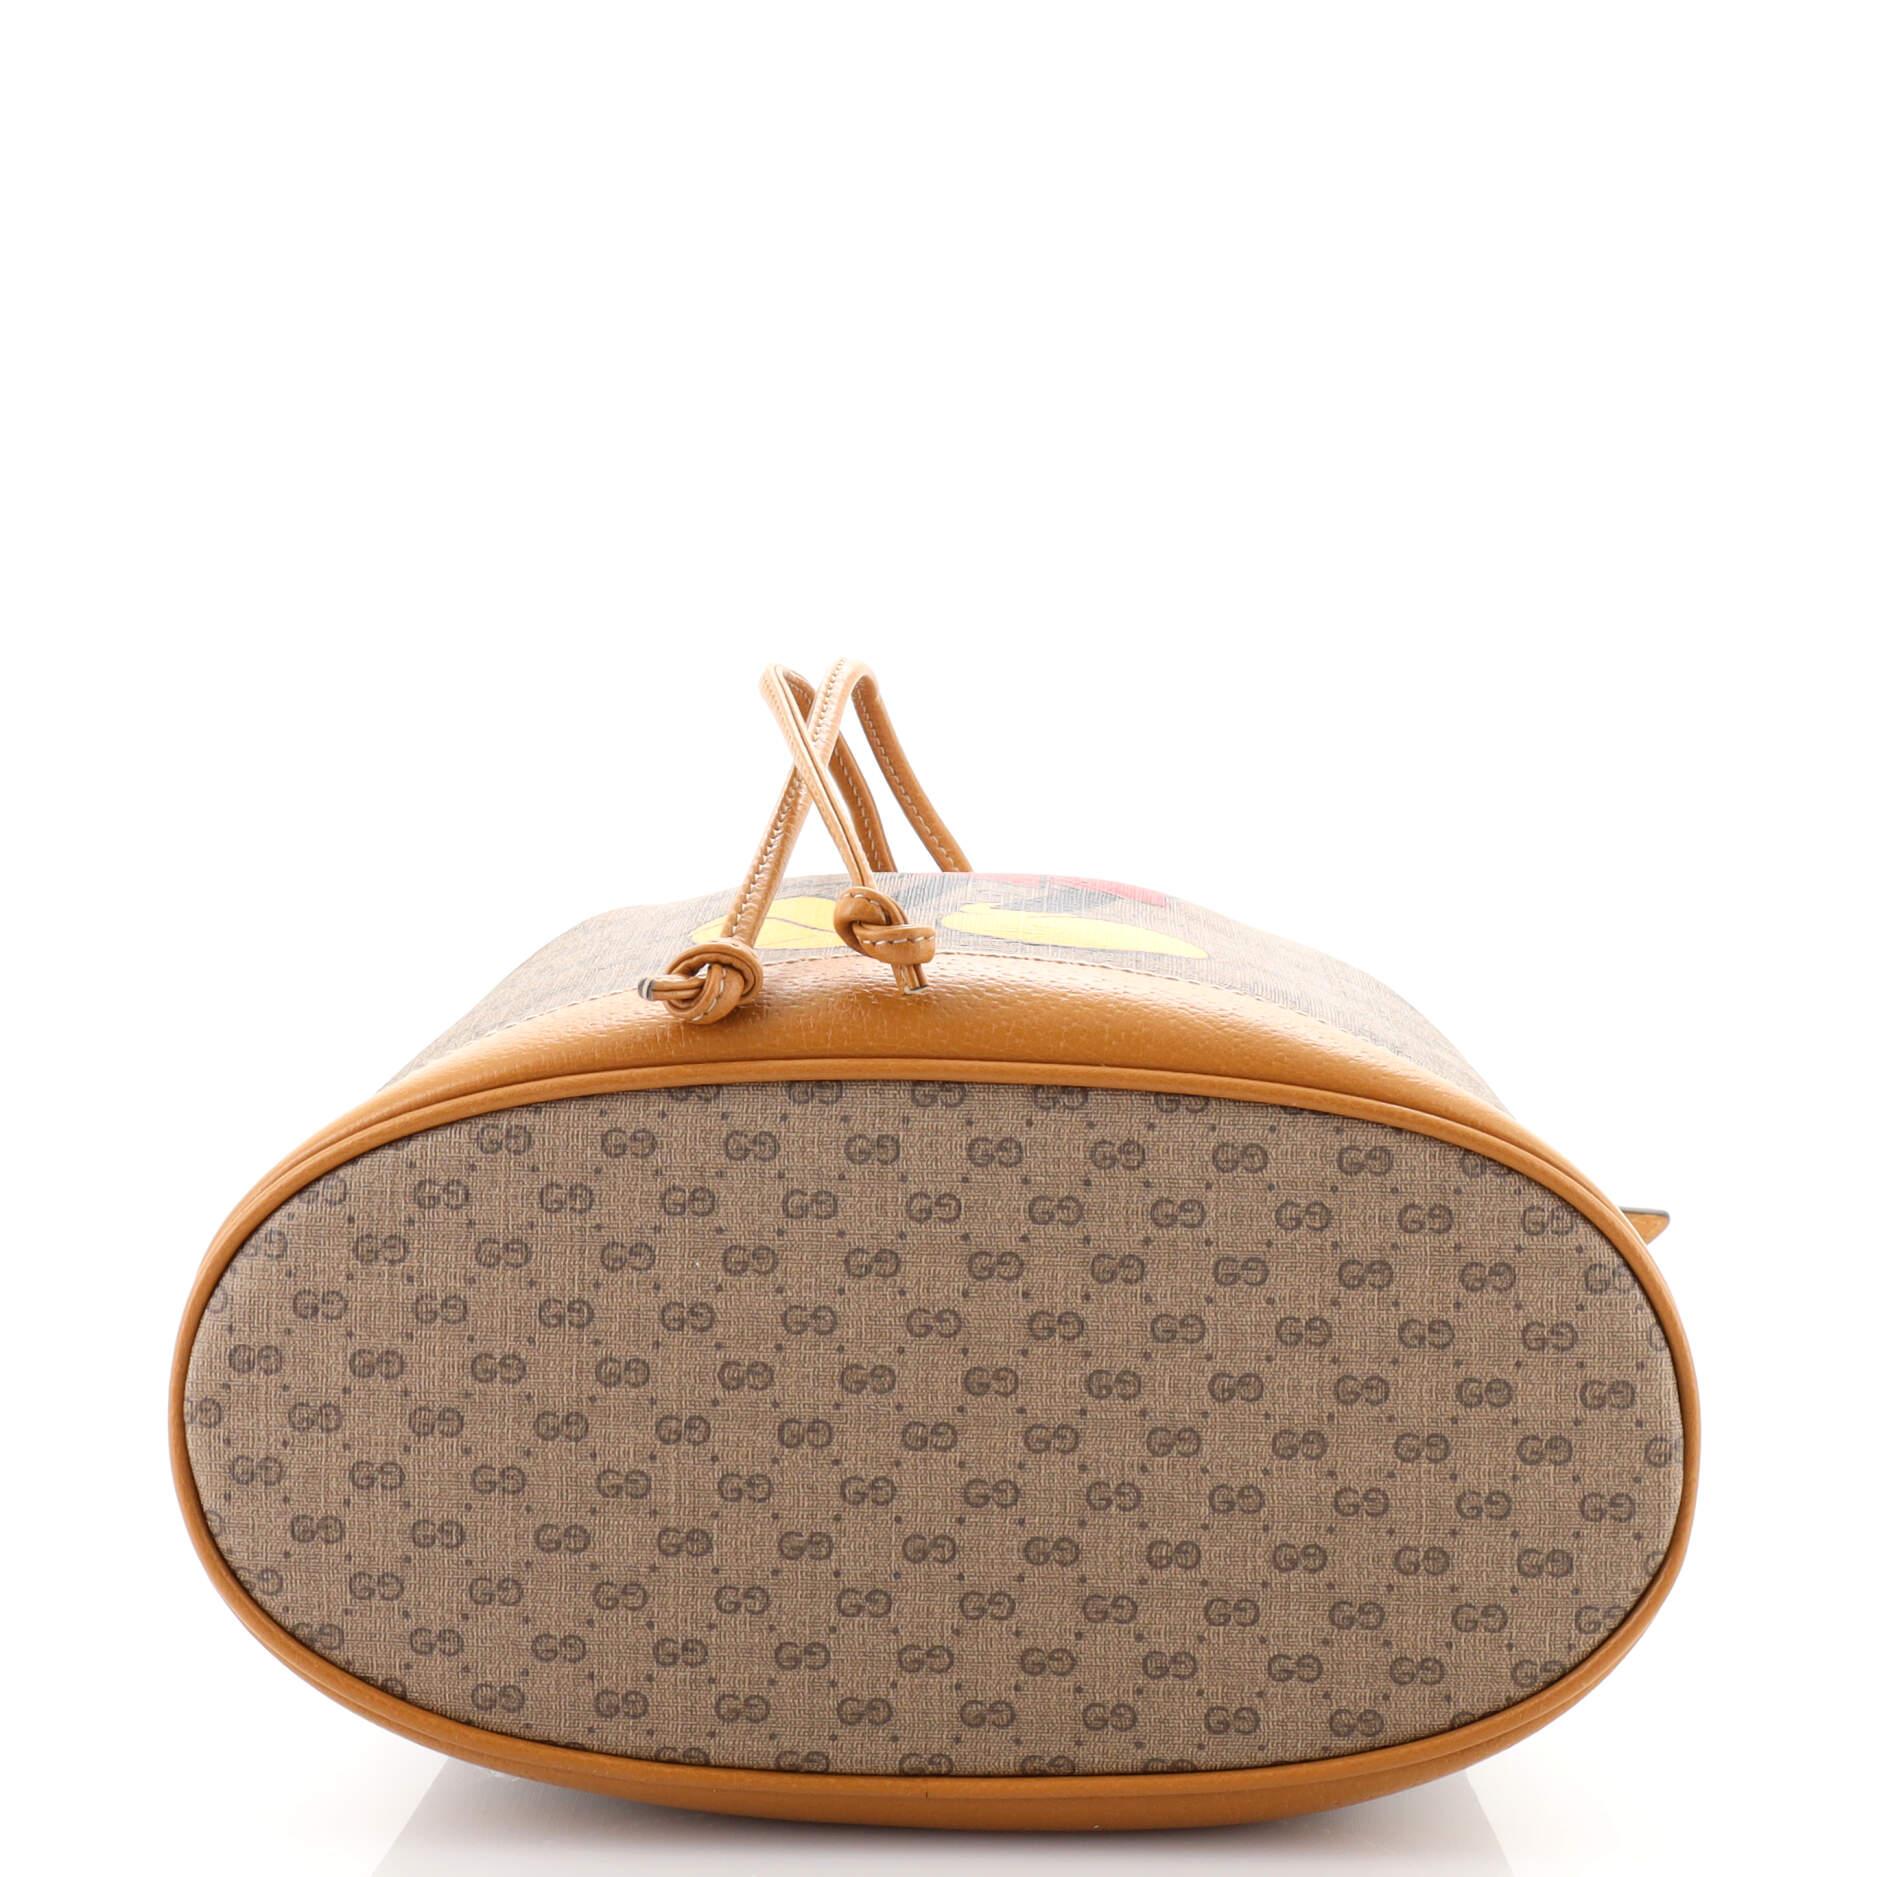 gucci mickey mouse bag price